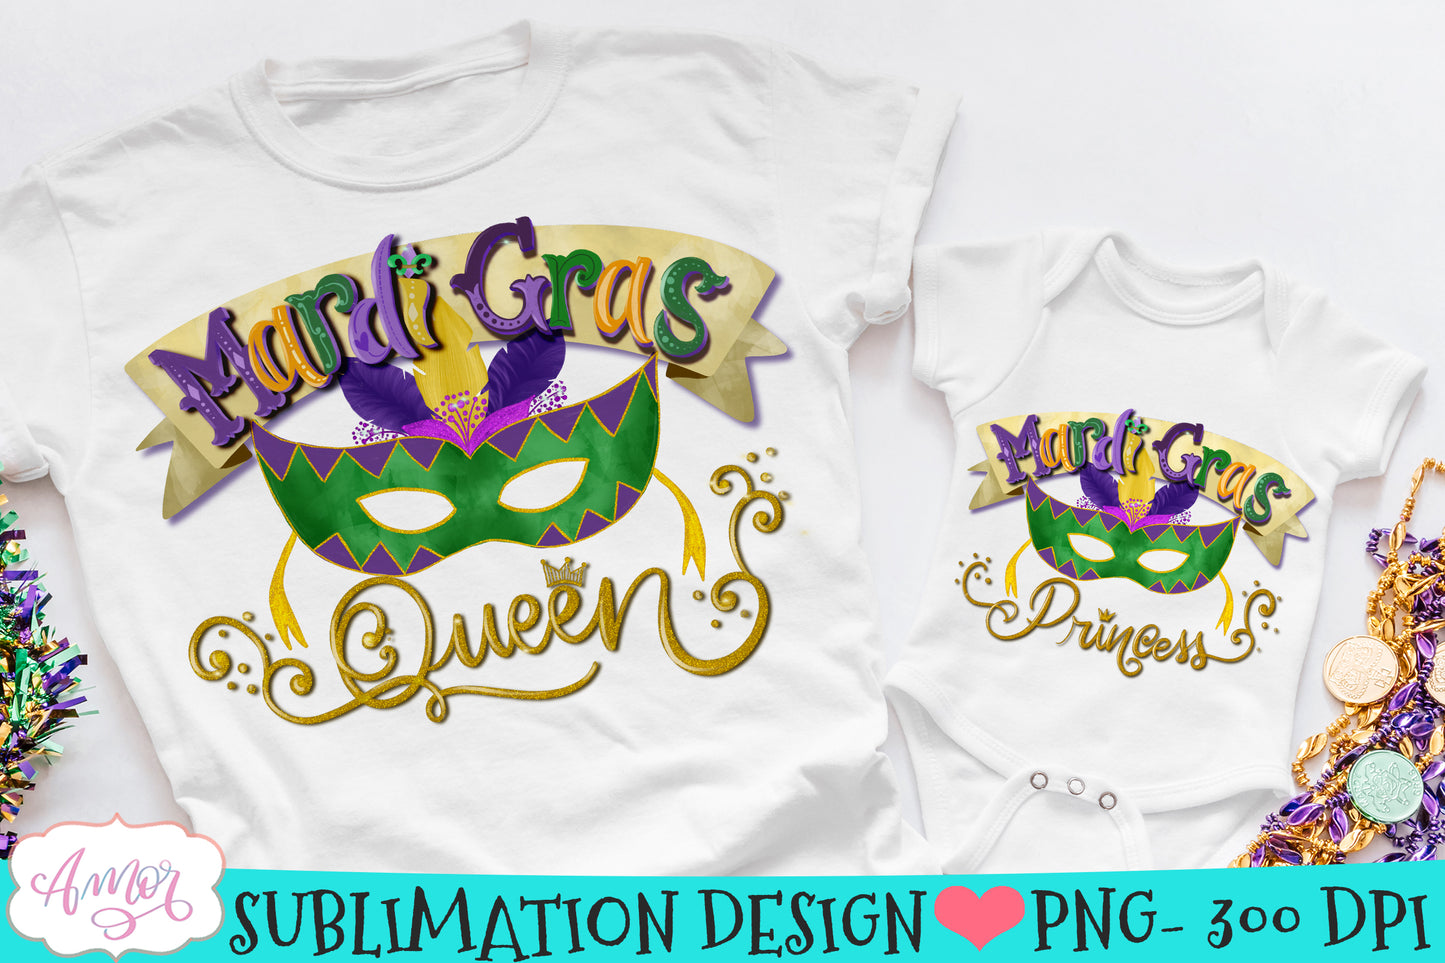 Mardi Gras Queen and Princess matching Sublimation designs